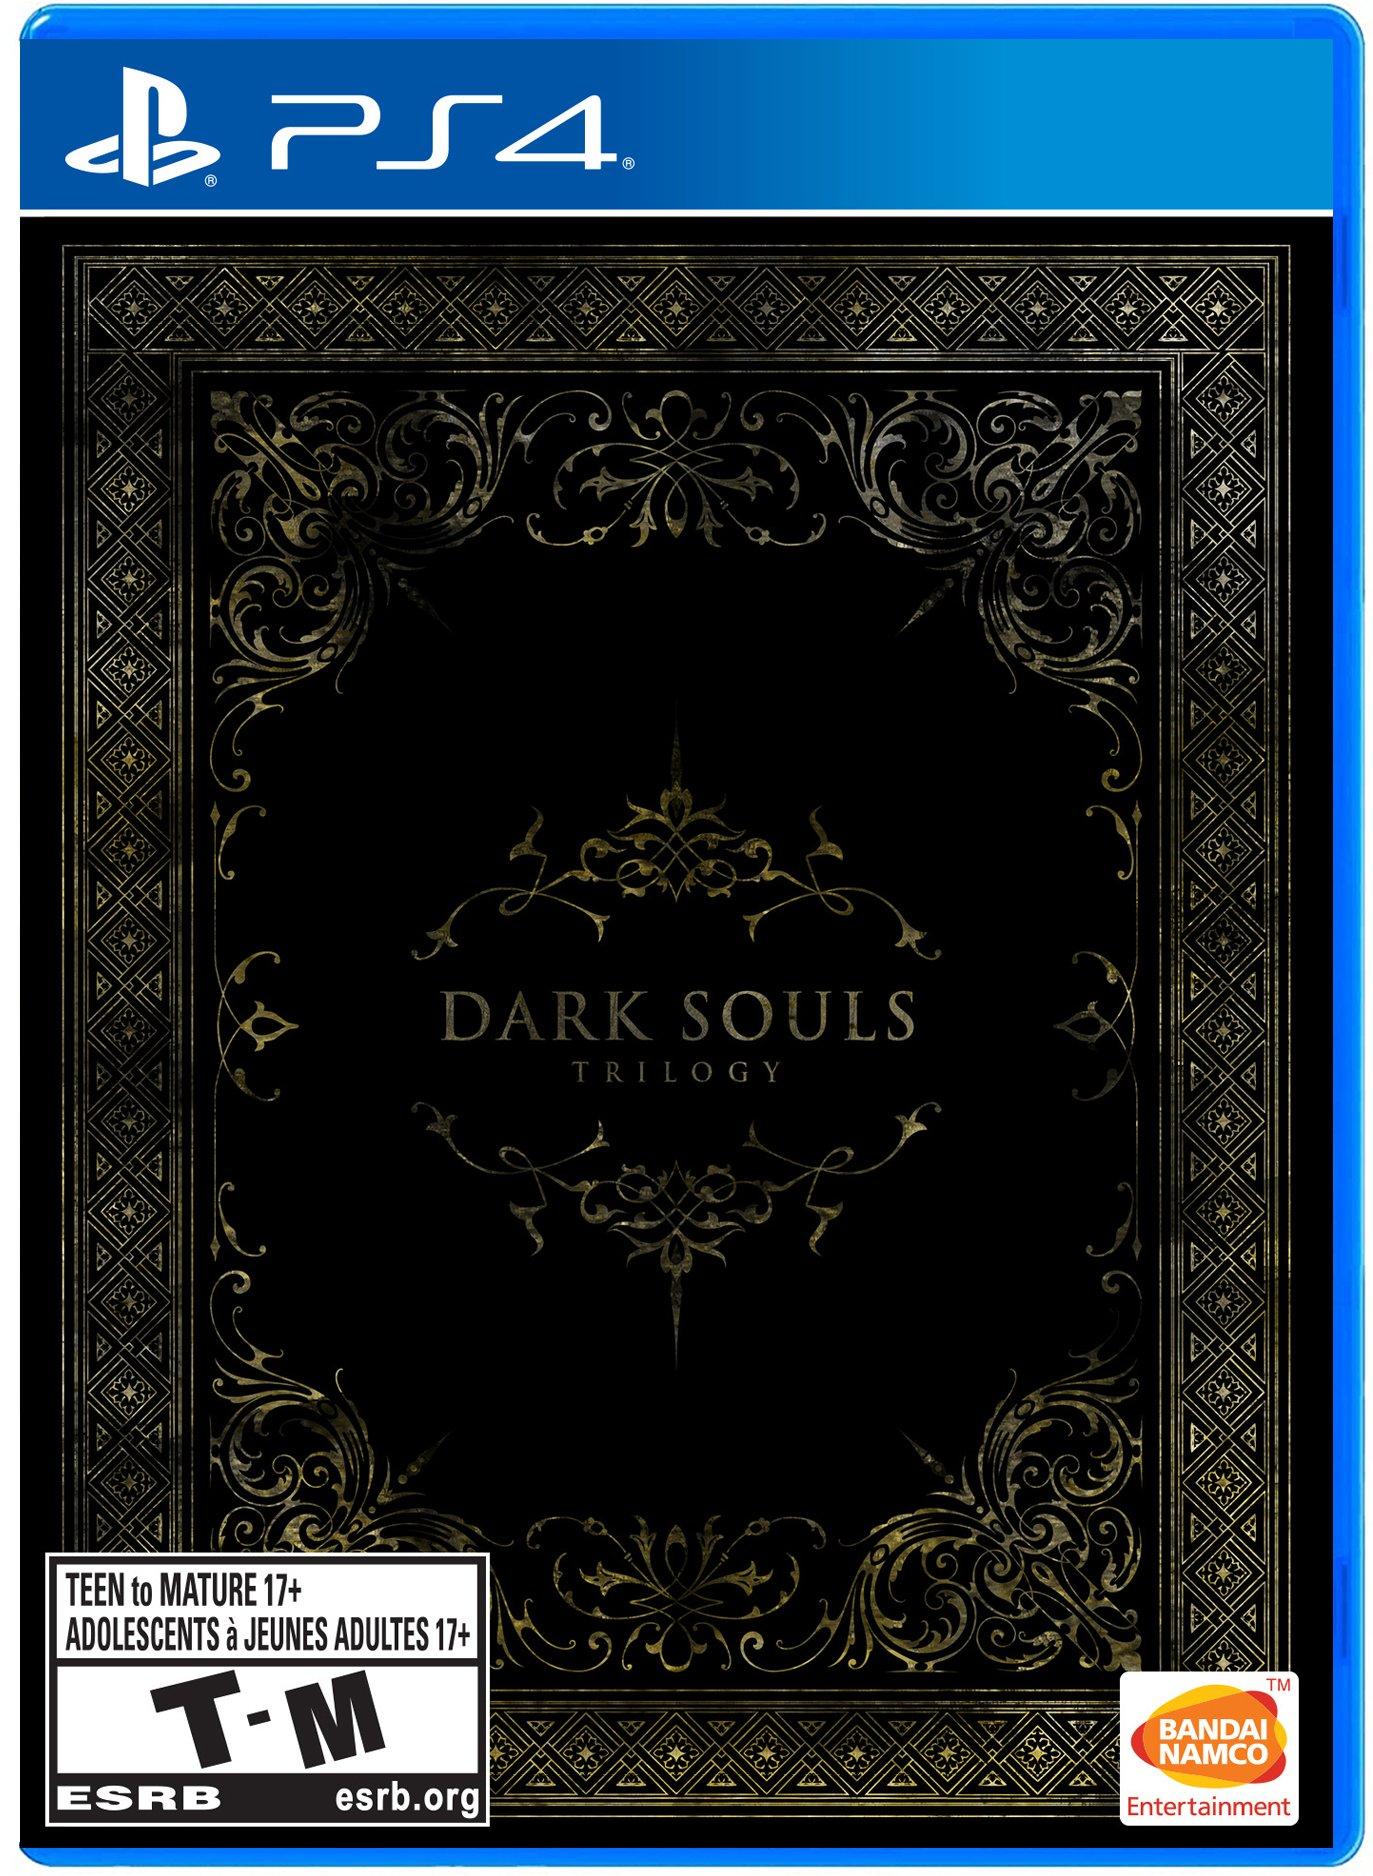 Dark Souls II Limited And Collectors Edition Get Early Access